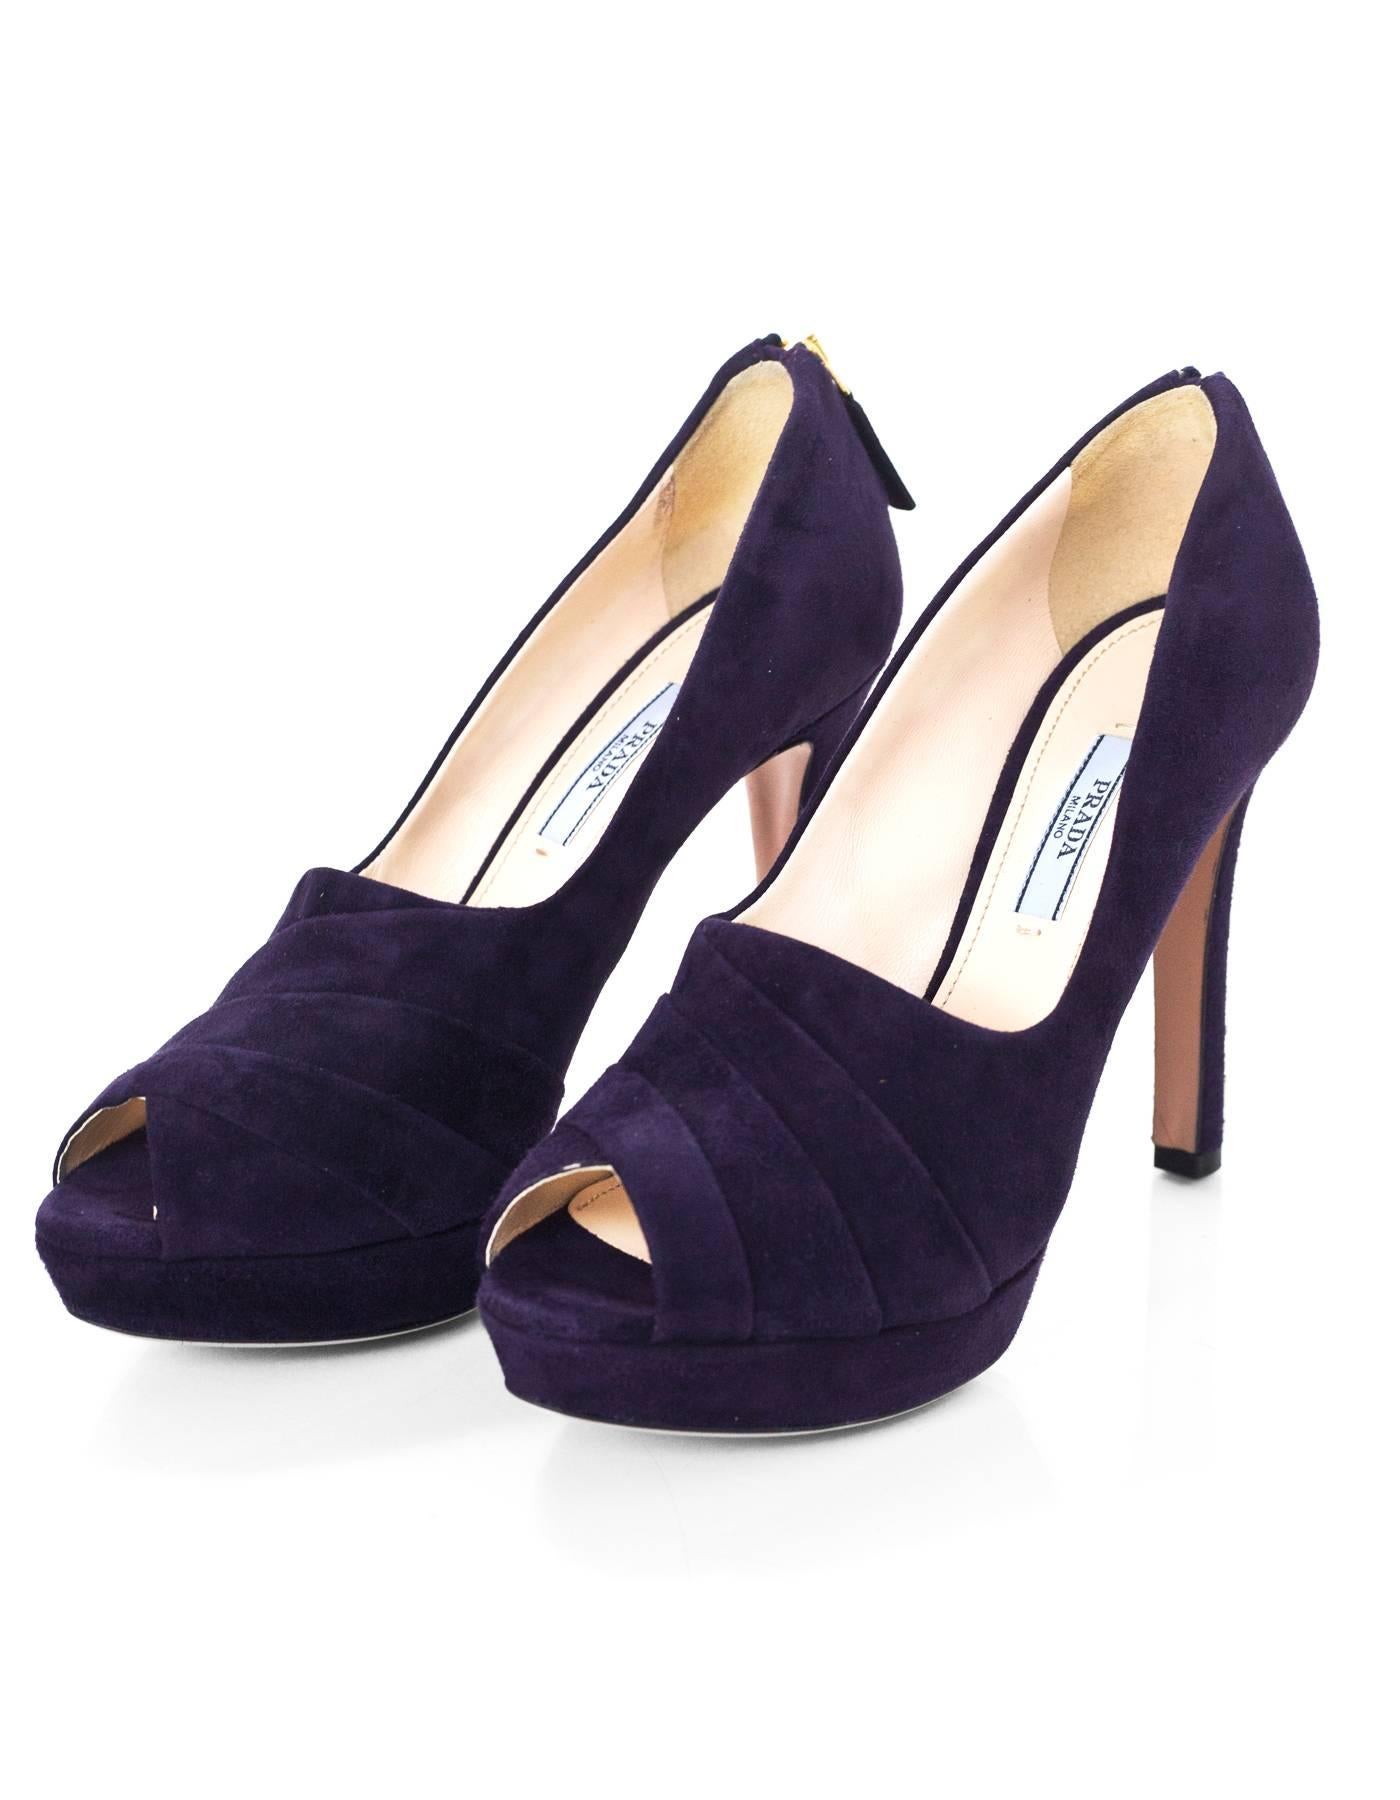 Prada Dark Purple Suede Pumps Sz 38.5 NEW

Features zipper detail at back of heel

Made In: Italy
Color: Dark purple
Materials: Suede
Closure/Opening: Slide on
Sole Stamp: Prada 38.5 Made in Italy
Overall Condition: Excellent pre-owned condition -